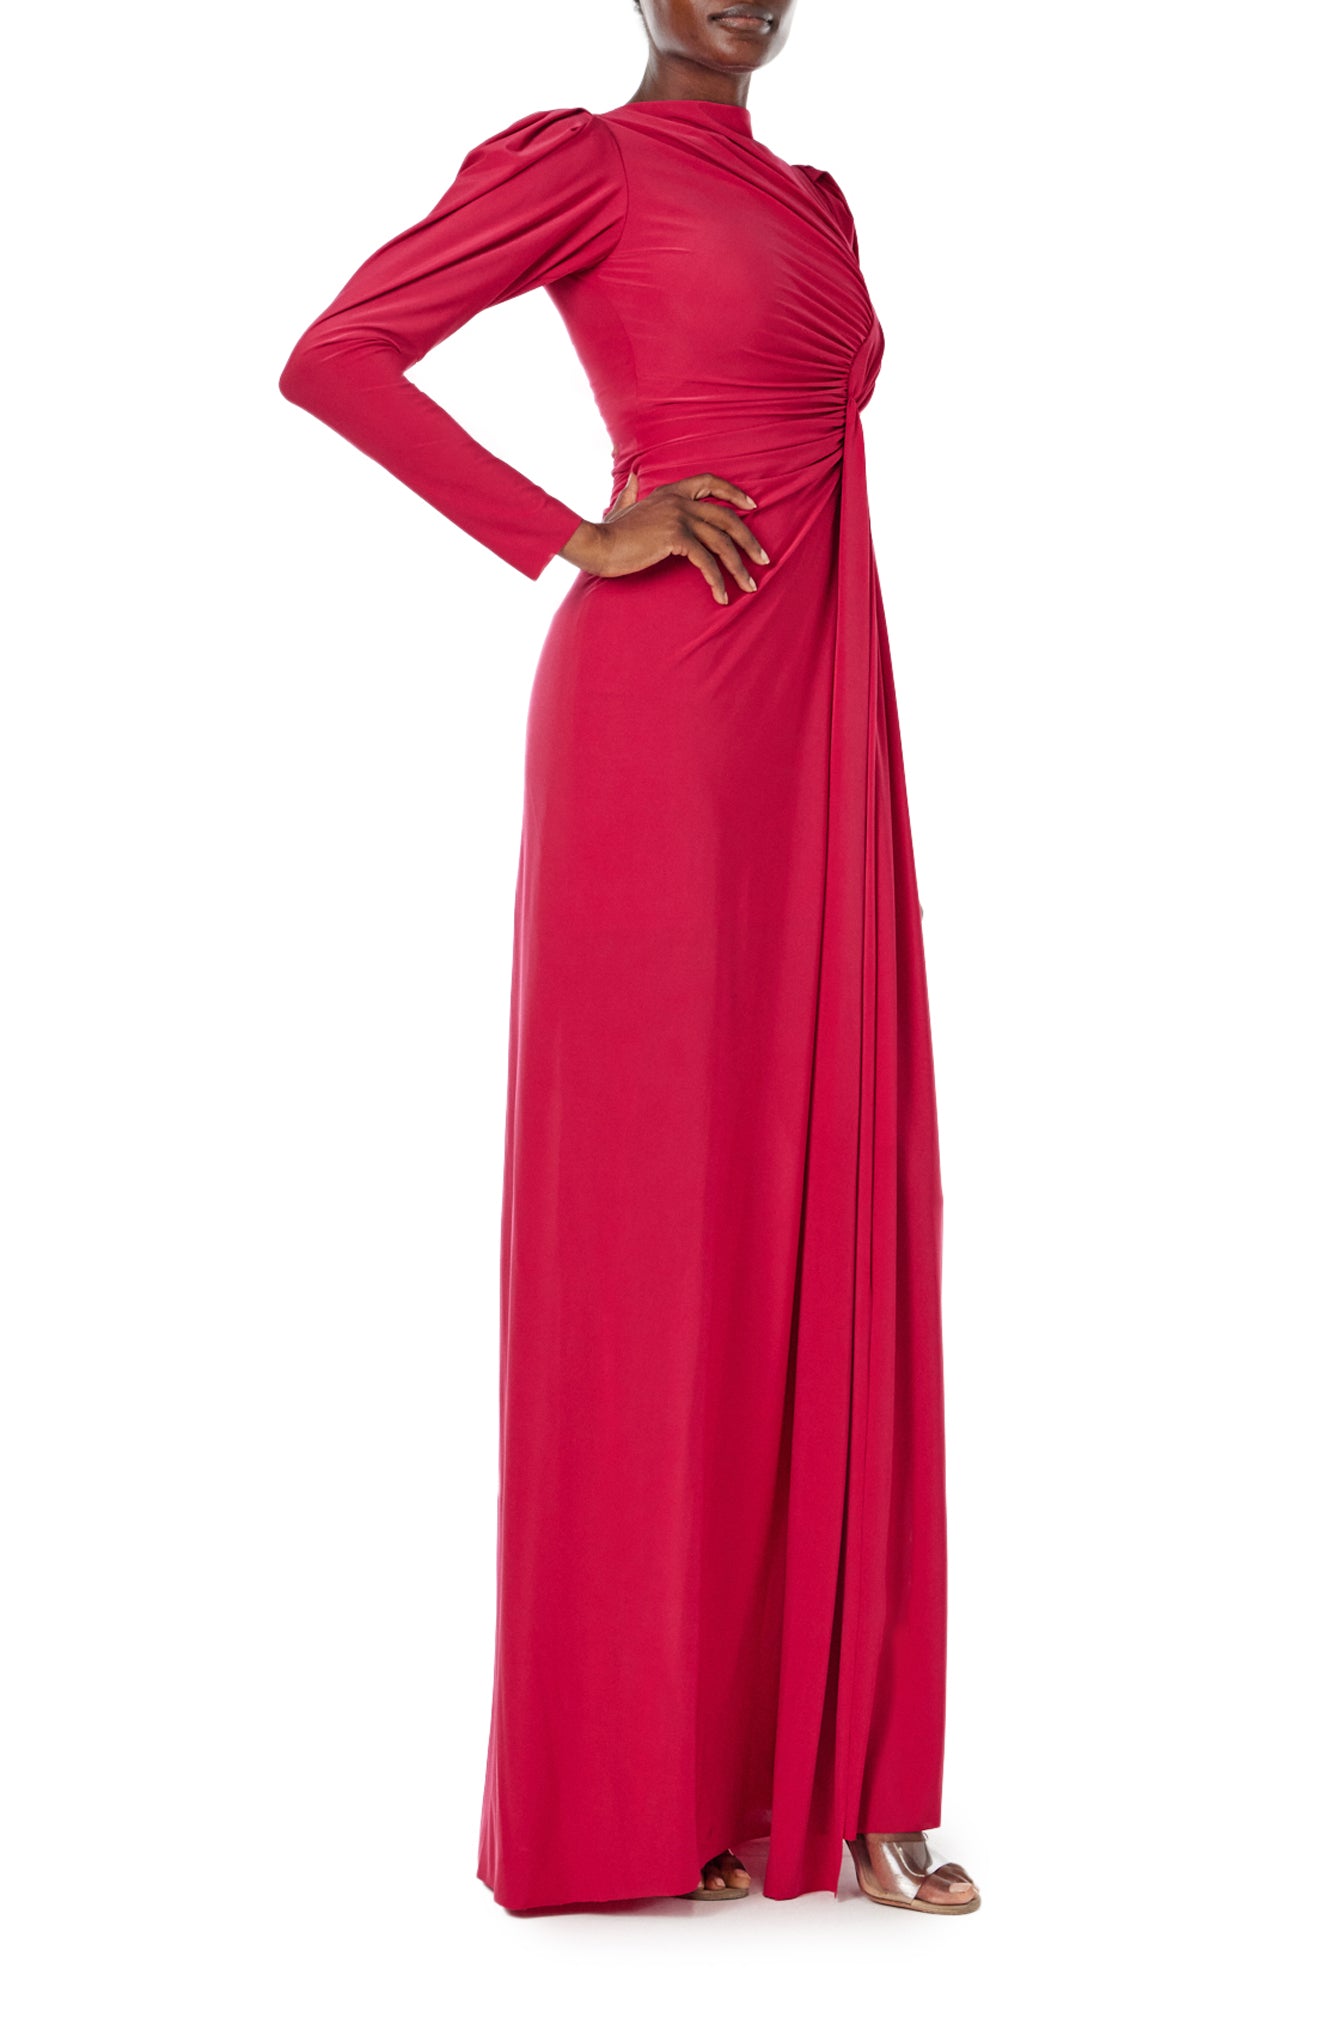 Monique Lhuillier Spring 2024 scarlet red matte jersey long sleeve, gown with draped bodice, jewel neckline and high front skirt slit - right side.